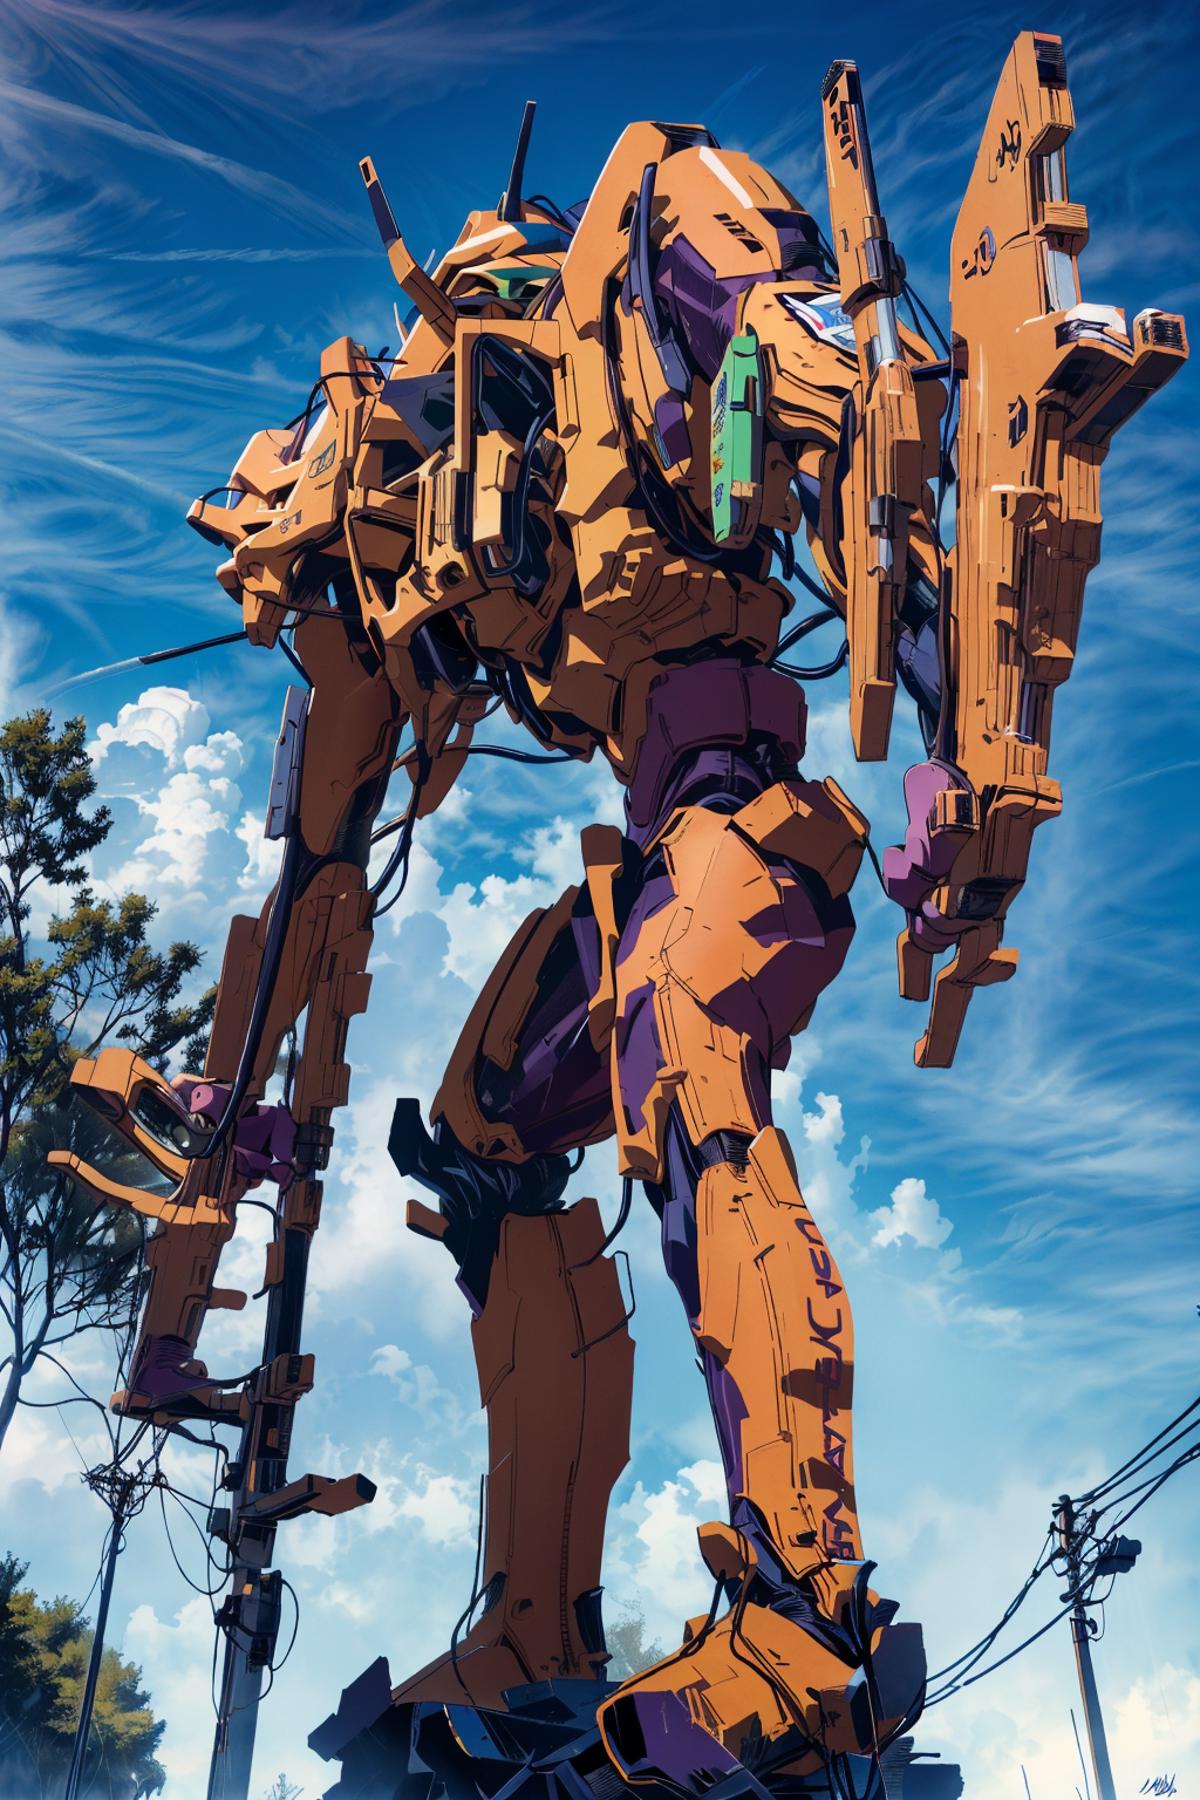 A large orange robot with purple accents stands against a blue sky.